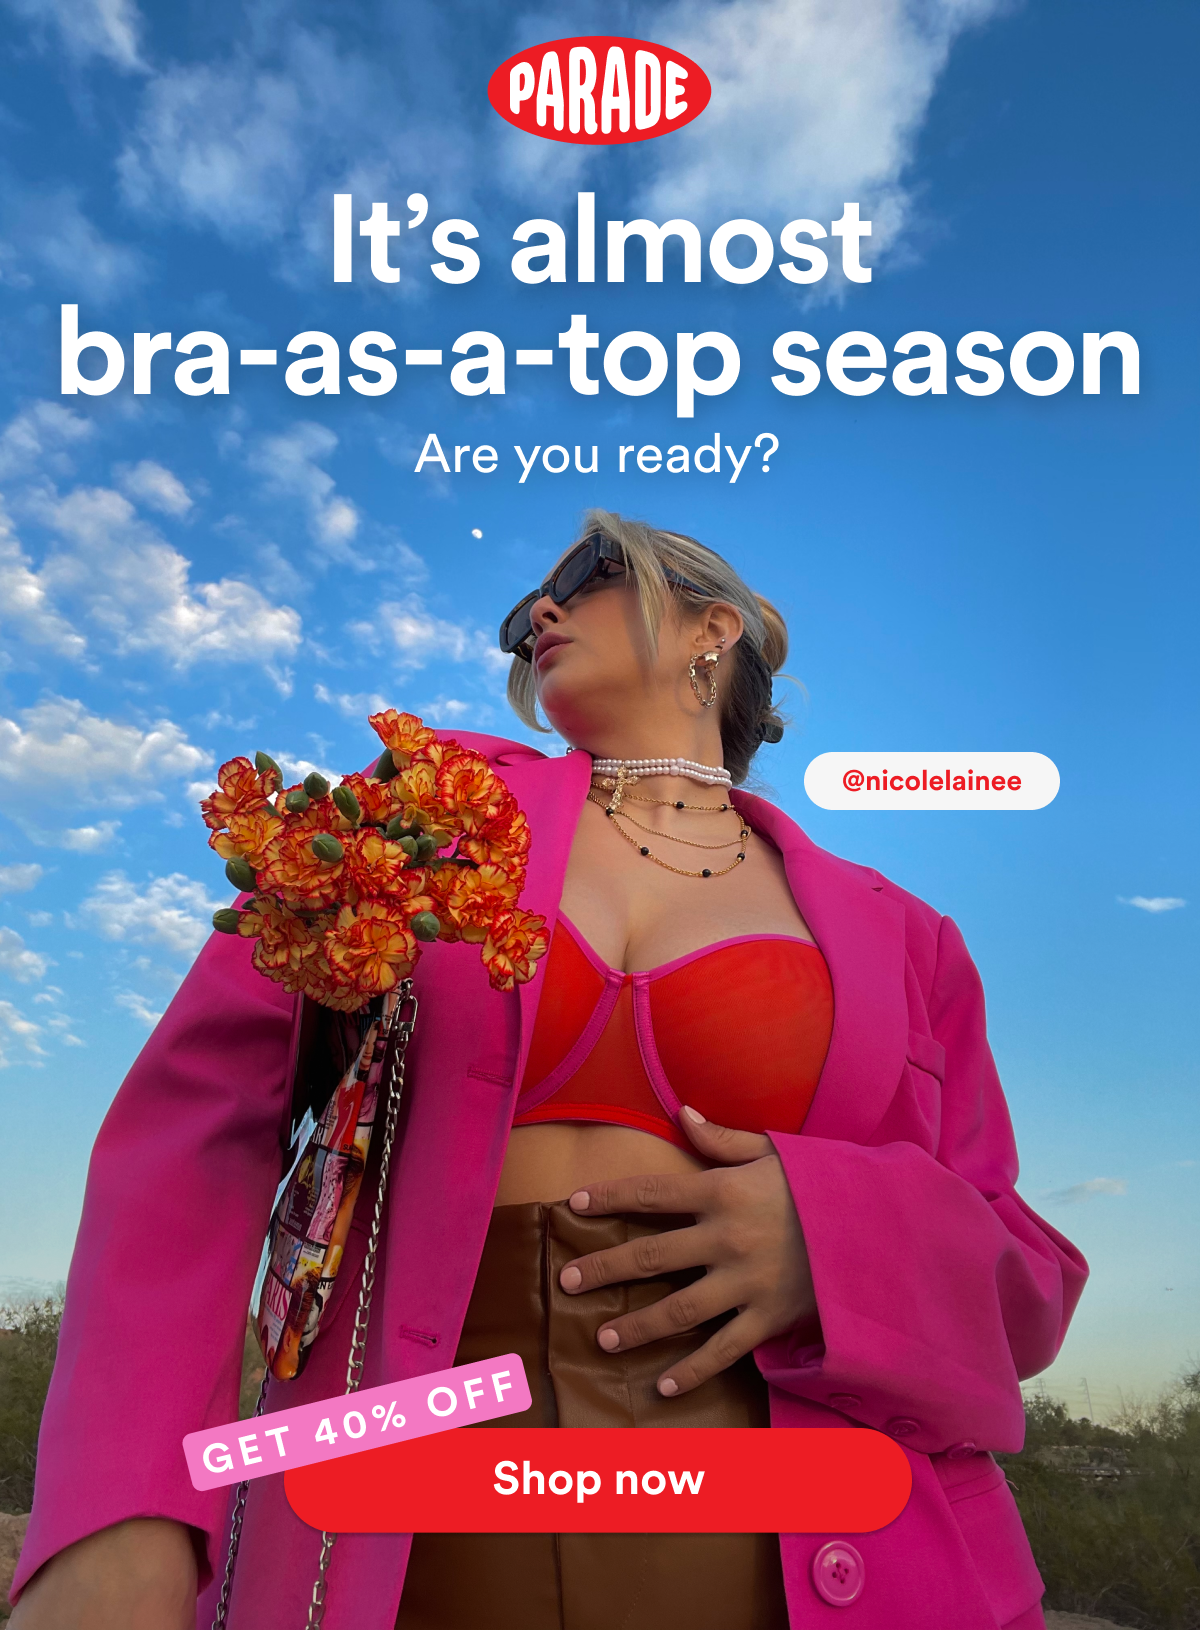 Parade: Bra-as-top season is coming, there